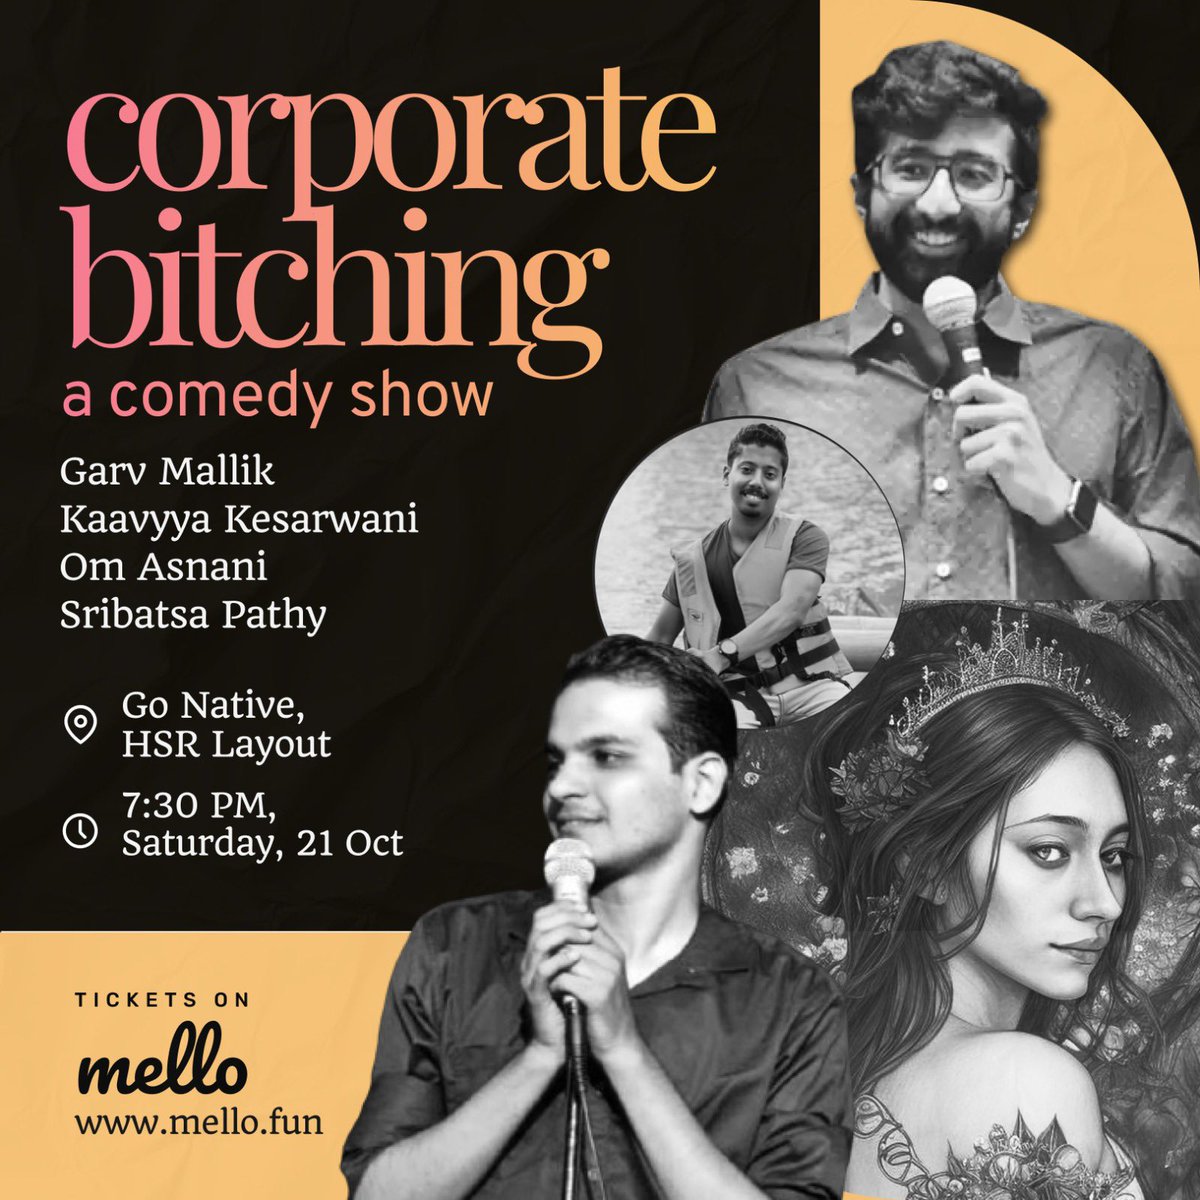 Doing this show tomorrow! Panelists are @om_asnani @kaavyya and @Bratster1 

You get to anonymously share your office problems, get worst possible solutions from us and hear stand up comedy. 

GoNative HSR, 7:30pm. Tix in reply